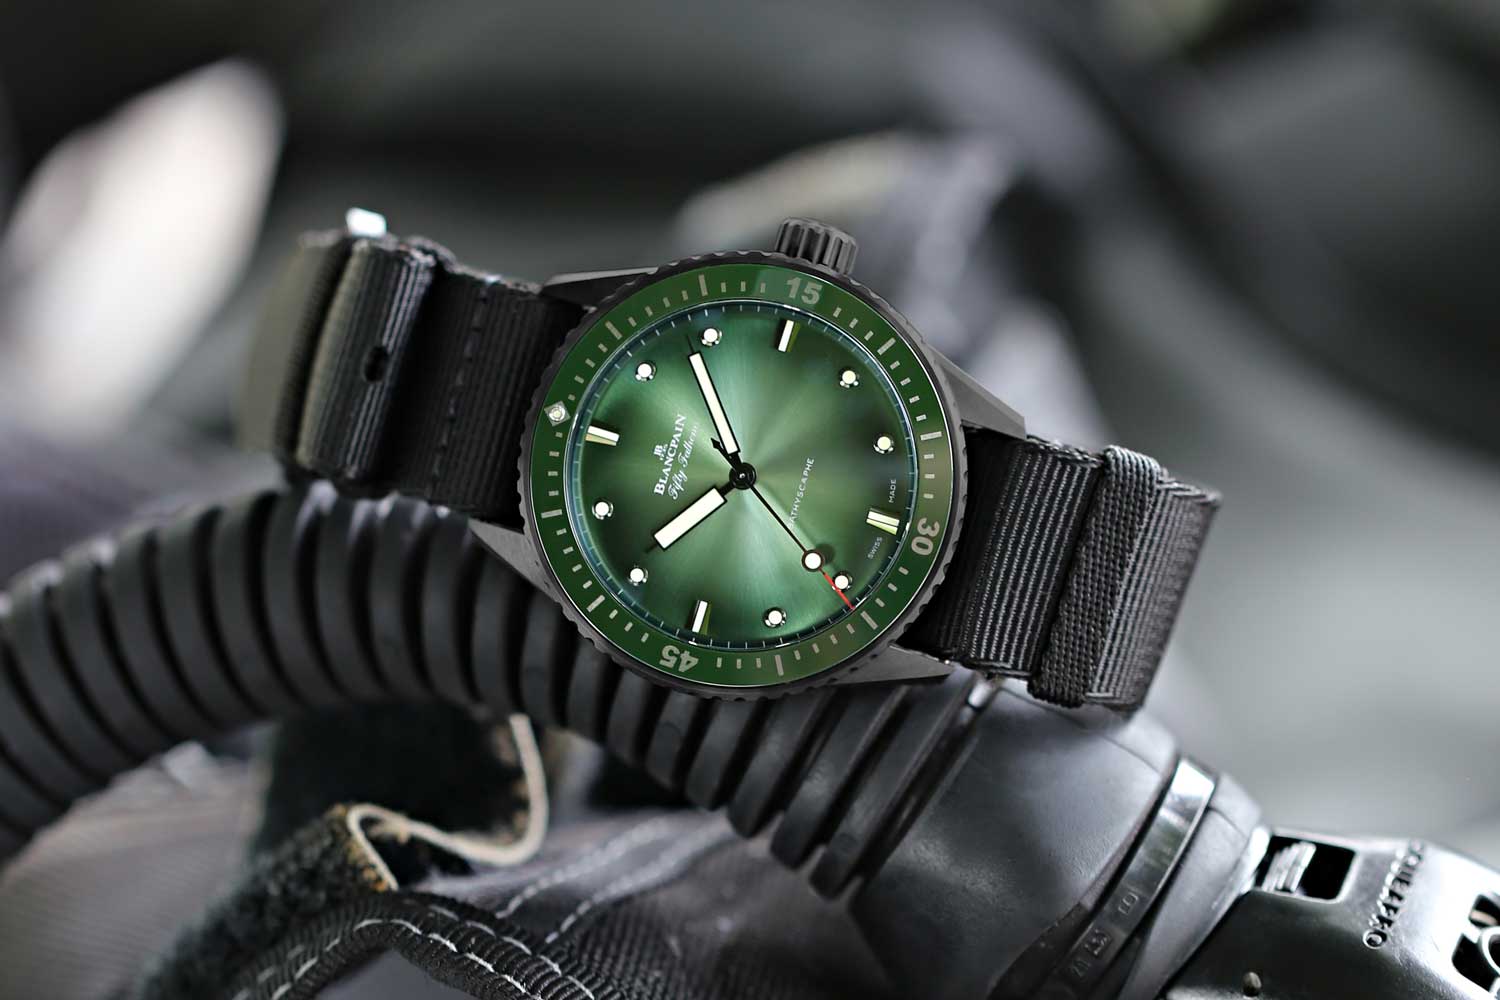 The Bathyscaphe Mokarran Limited Edition with the extraordinarily good-looking green dial, limited to 50 pieces